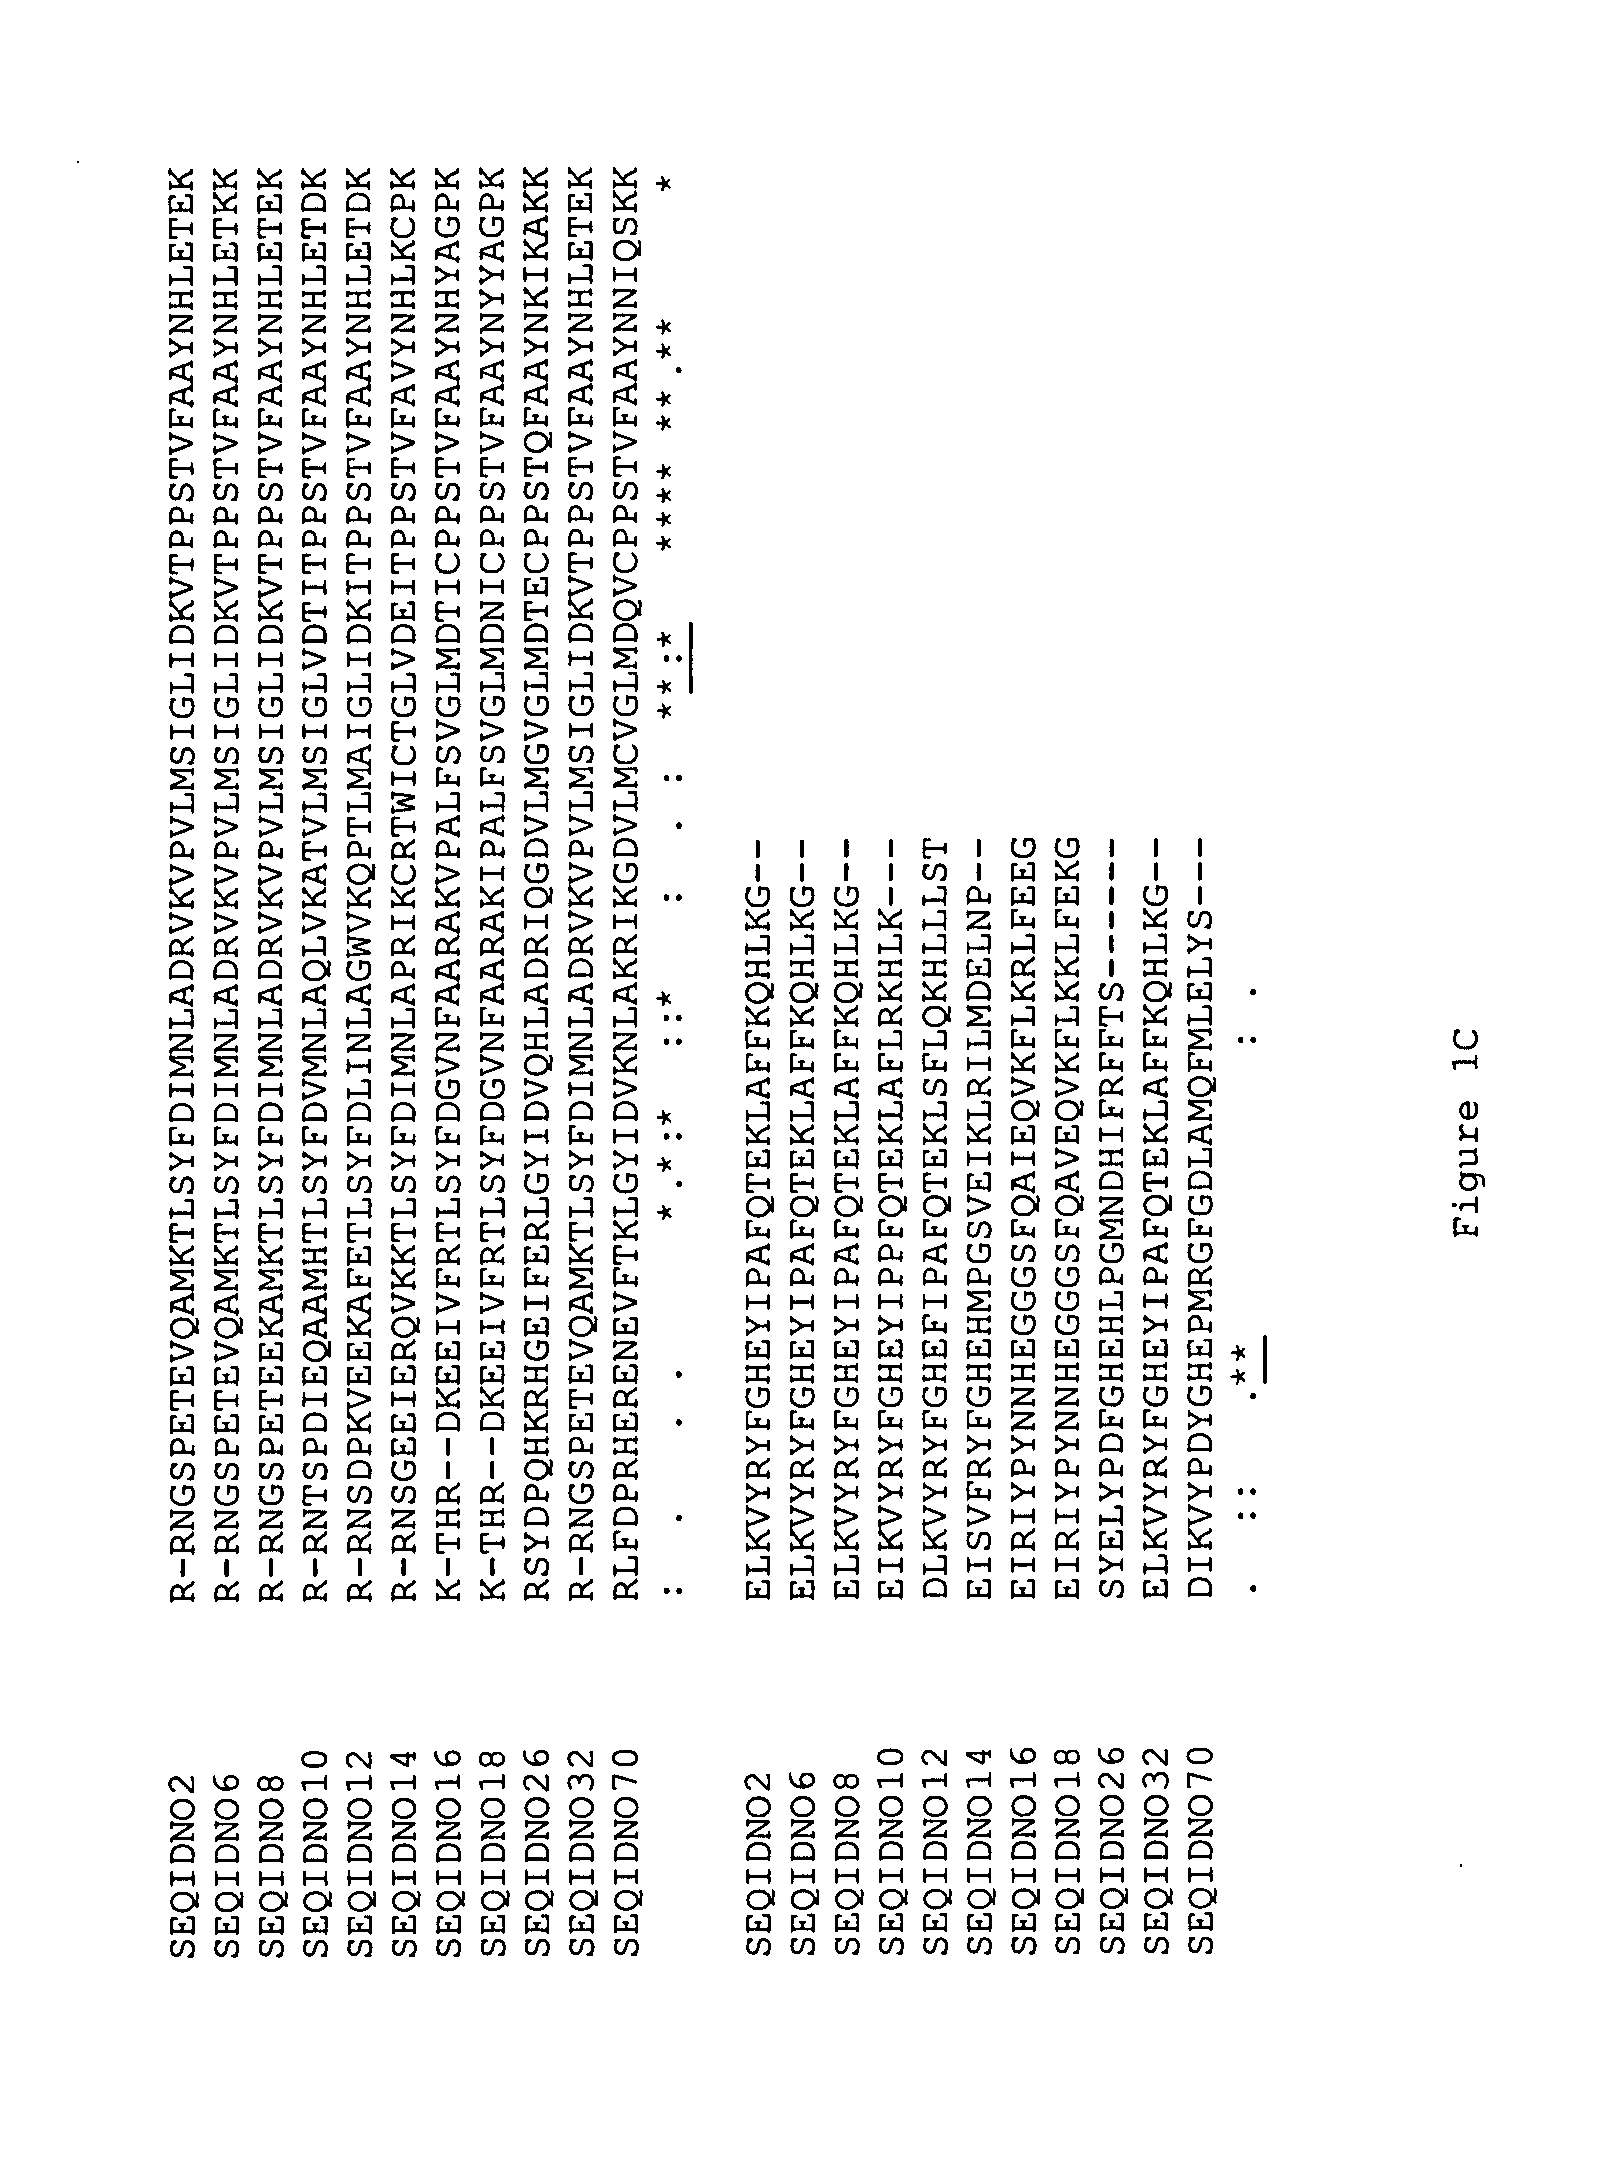 Production of peracids using an enzyme having perhydrolysis activity